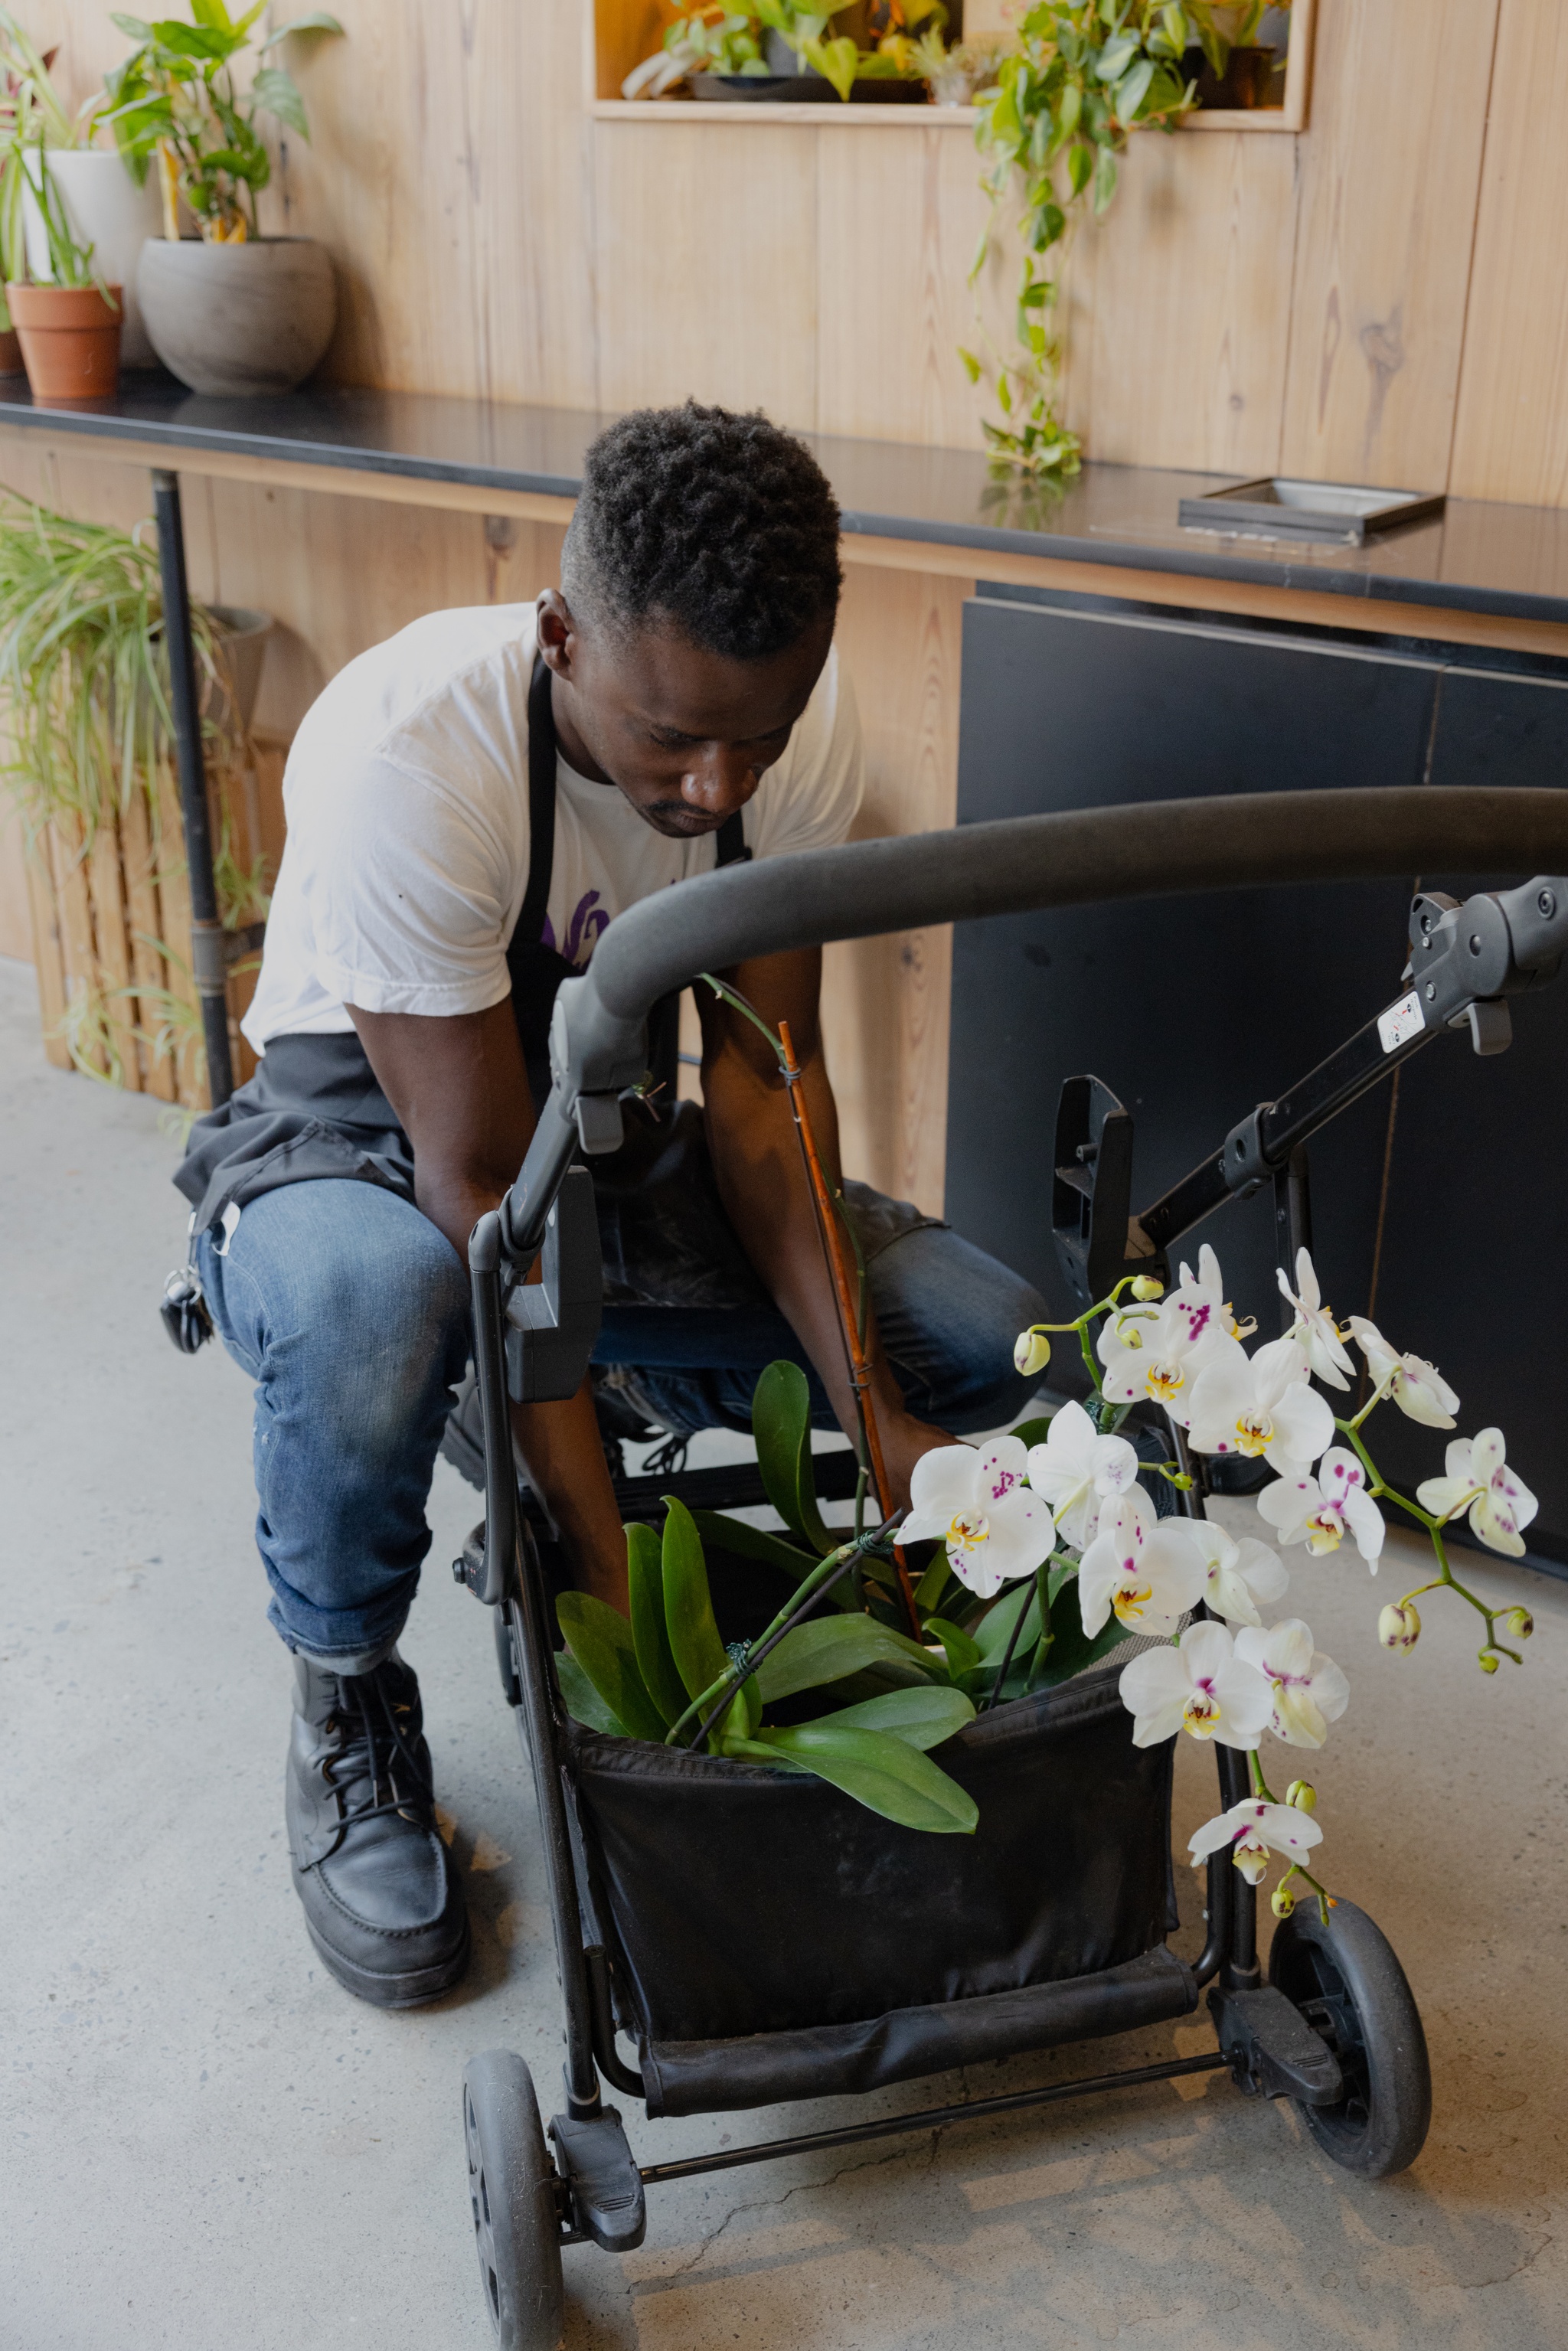 Artist Jeffrey Meris, a Black man with short hair and a fade around the sides of his head, kneels in front of a stroller in a café. He is looking down at the white orchids he is arranging in the stroller. 